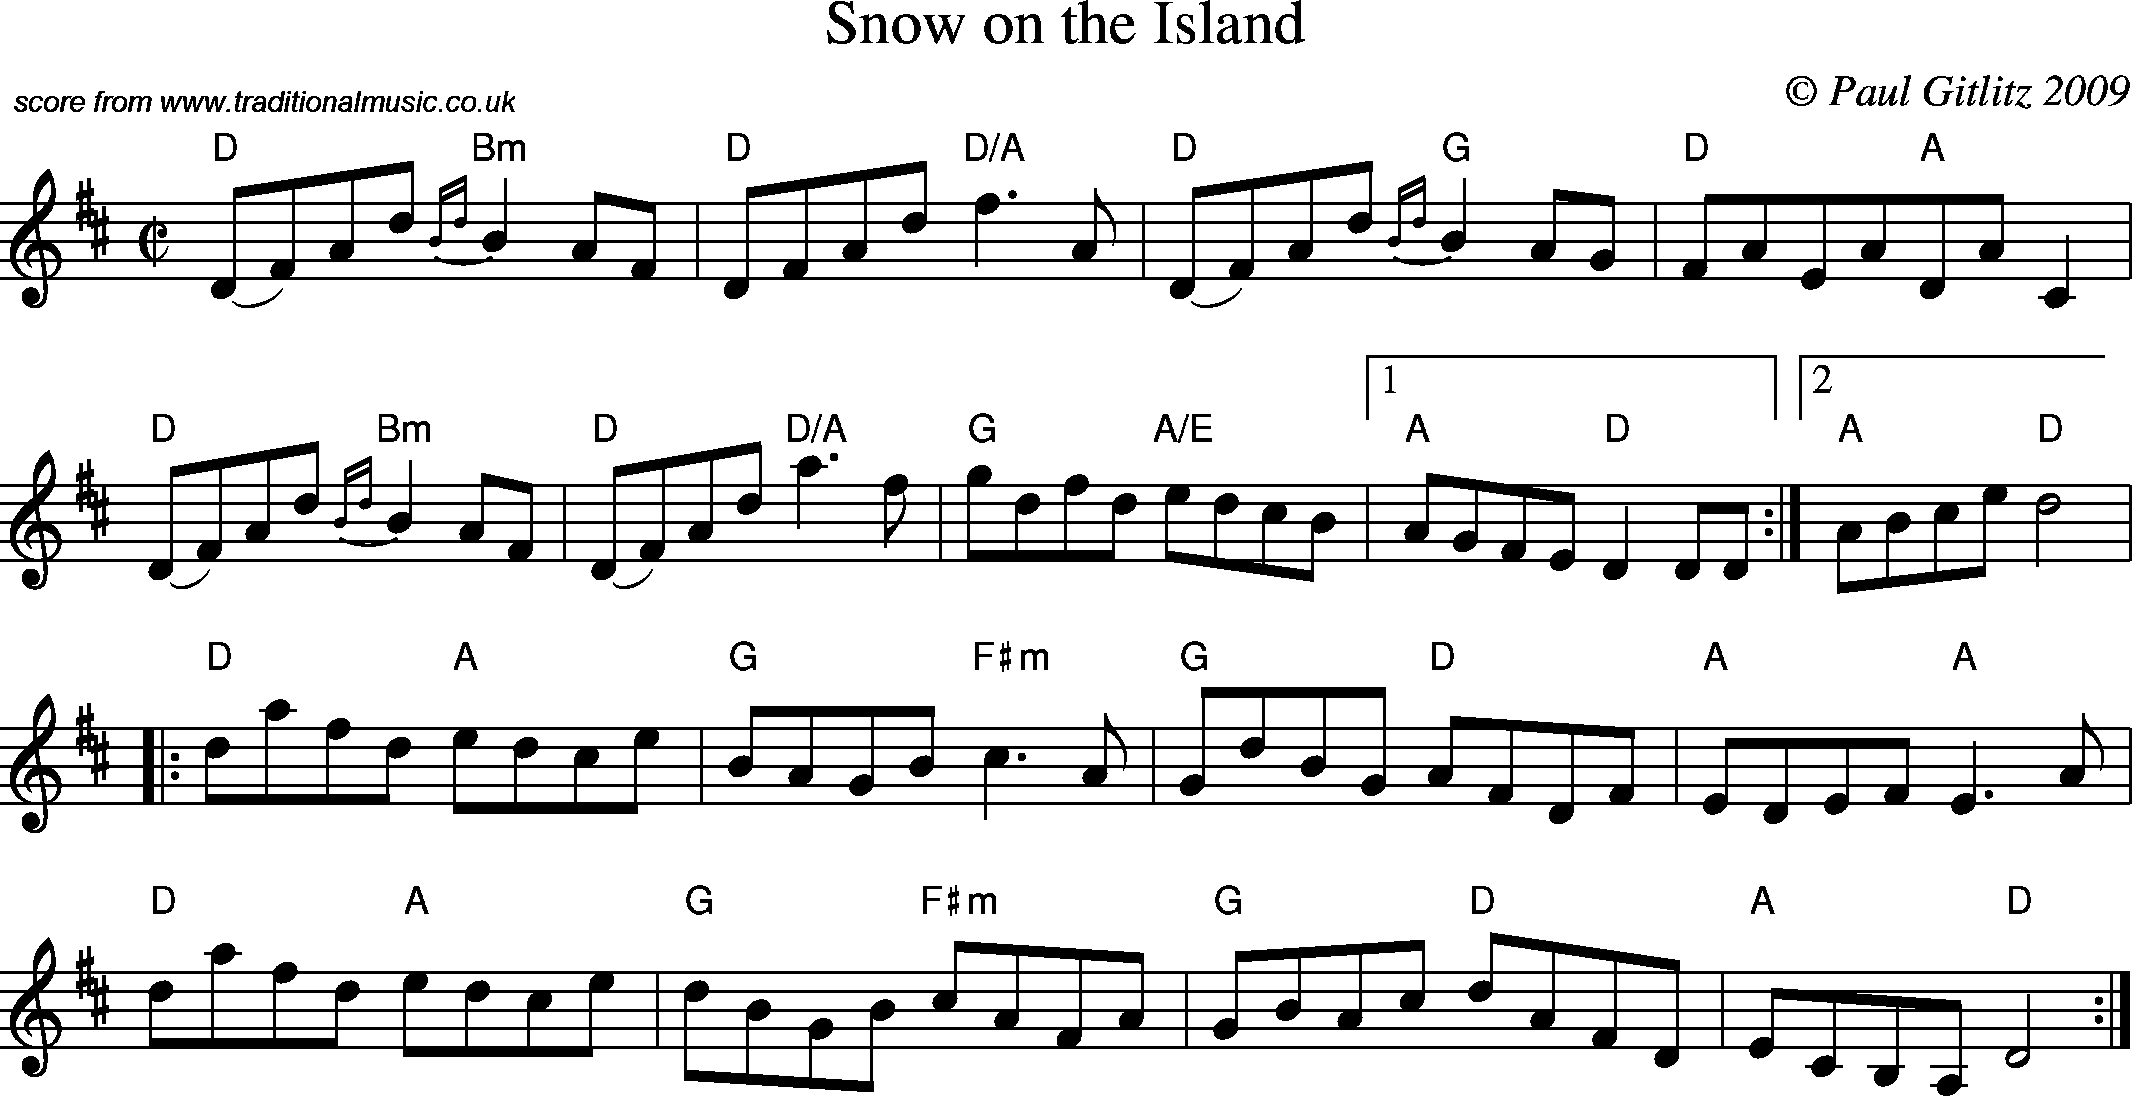 Sheet Music Score for Reel - Snow on the Island